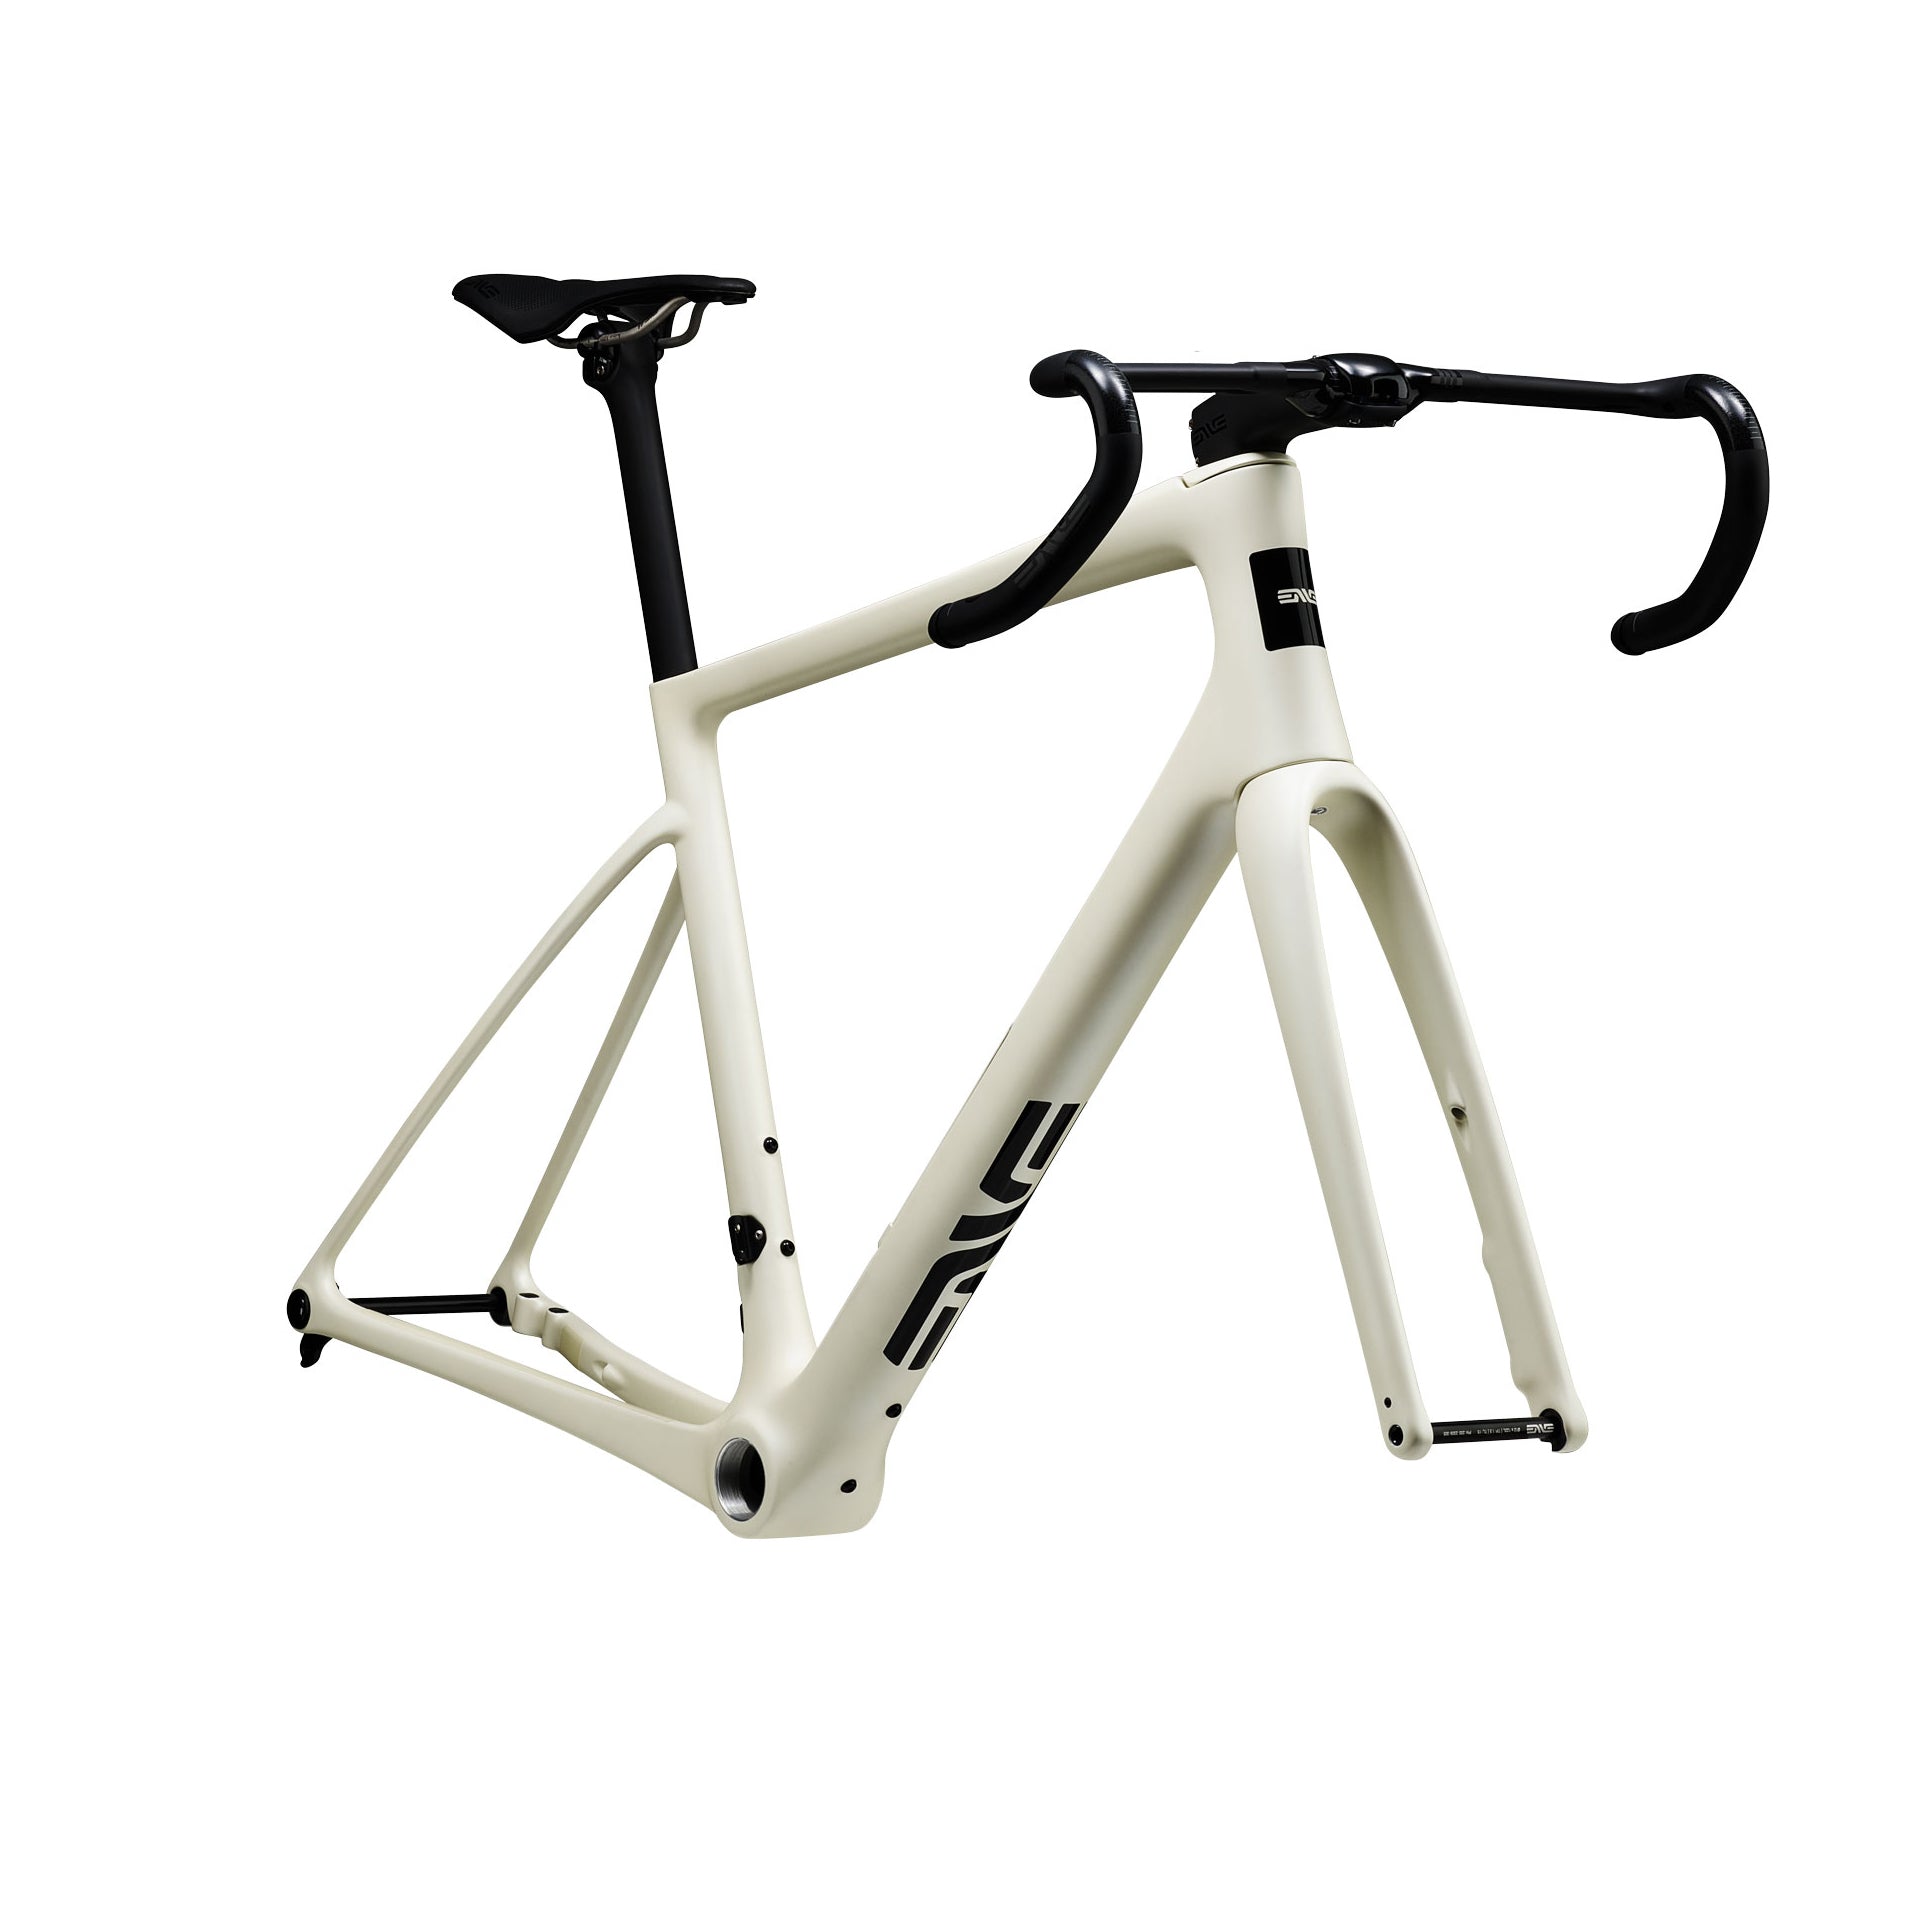 The front of an Enve Fray Endurance road bike in the salt colorway